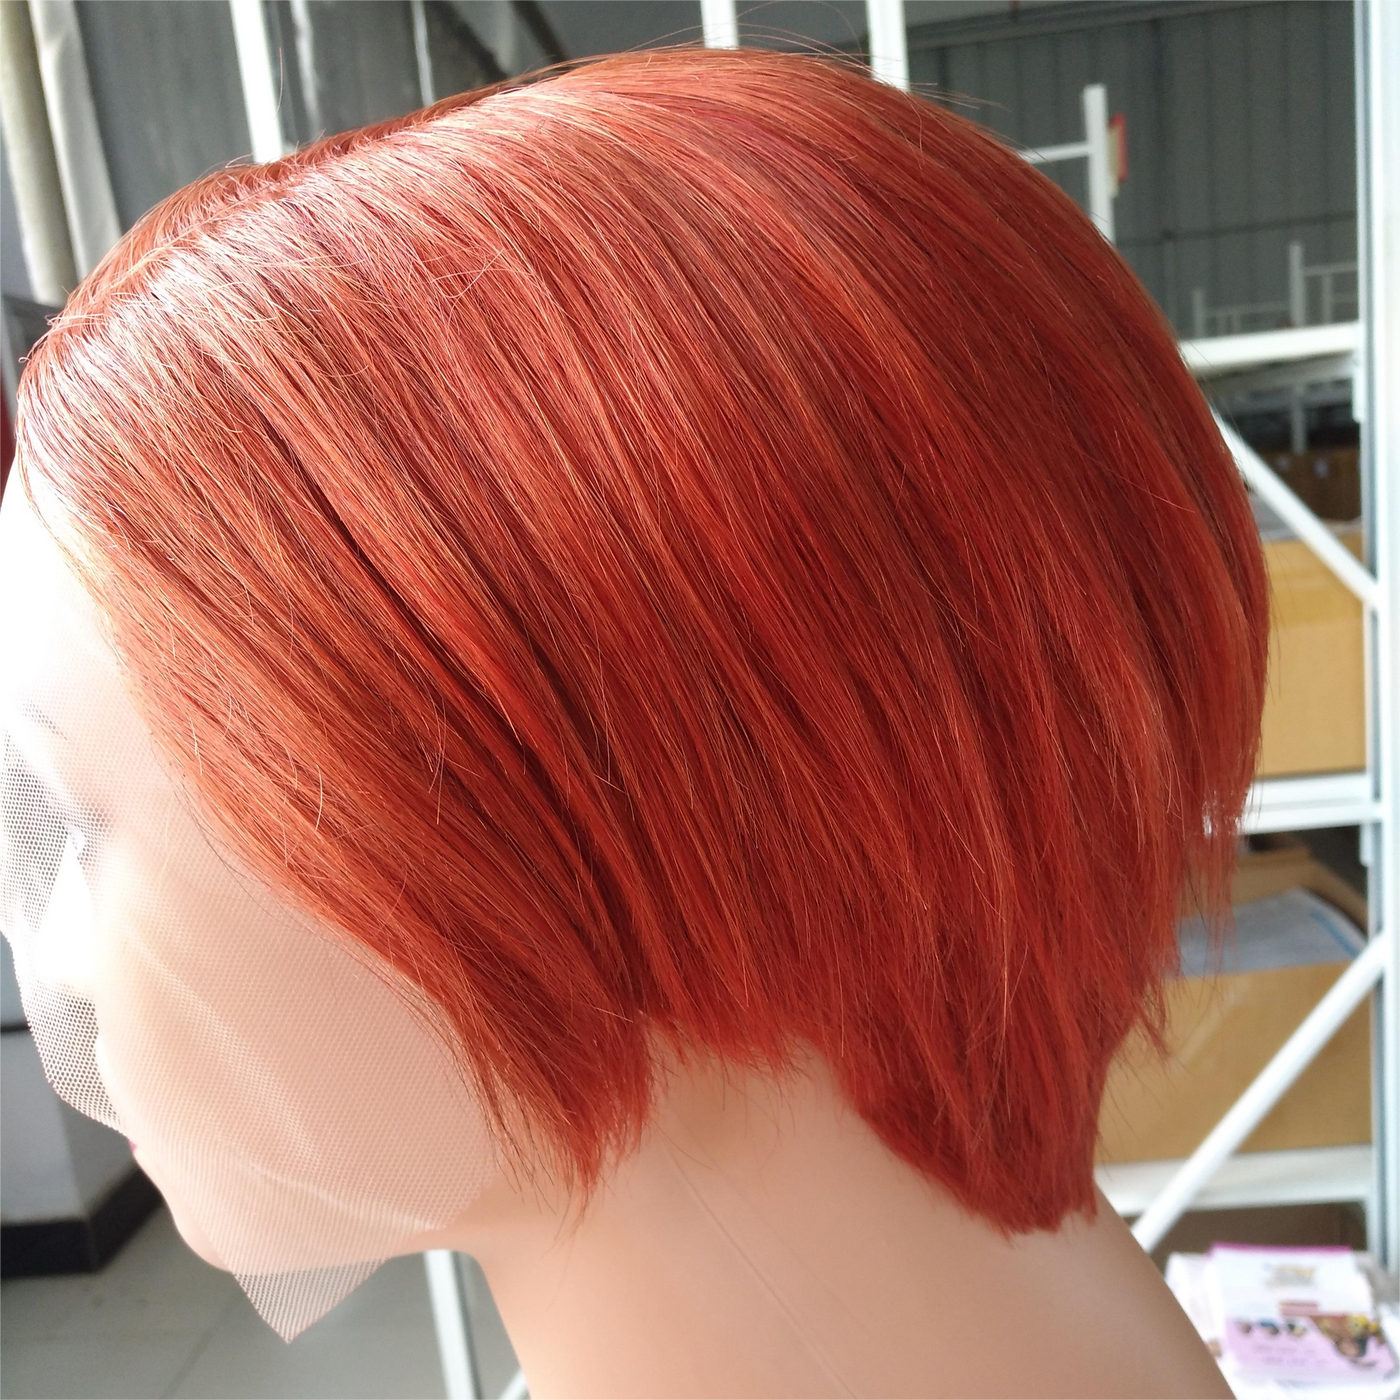 #33 ginger 13x1 HD-Lace Front Pre-Plucked Short Pixie Cut Bob Classy Swoop Bang Wig Keshona